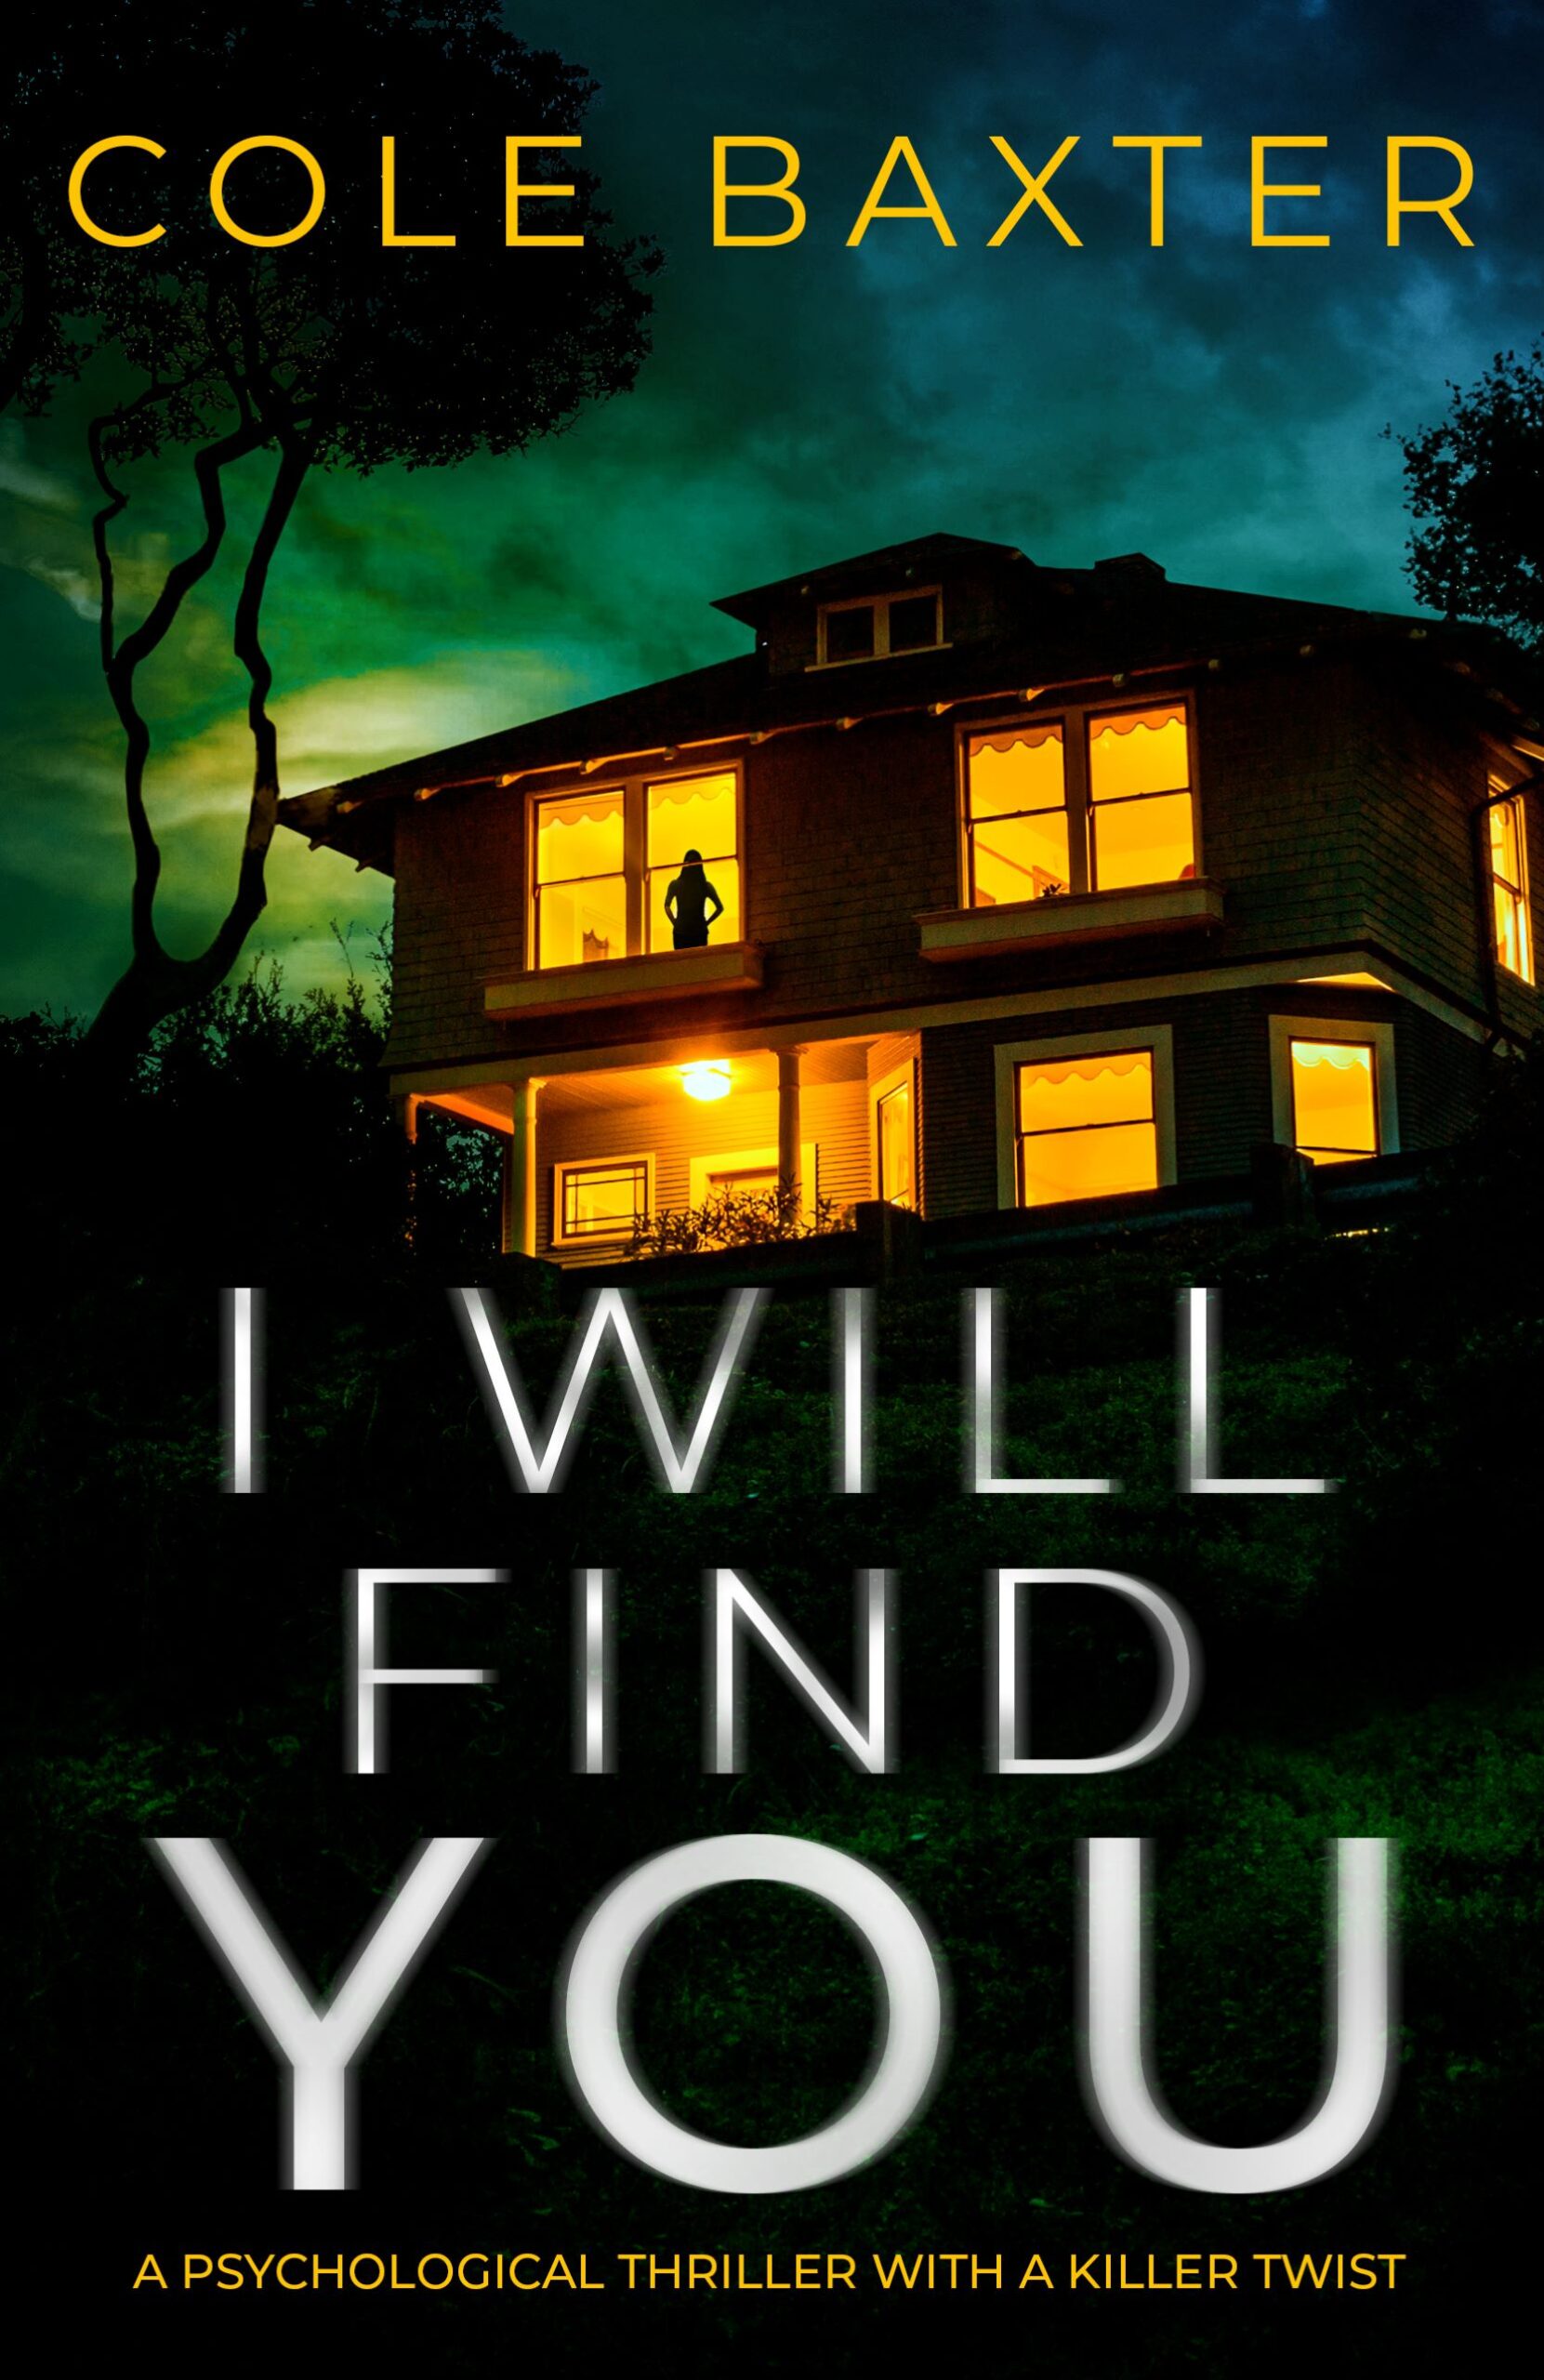 COLE BAXTER NEW RELEASE – I WILL FIND YOU